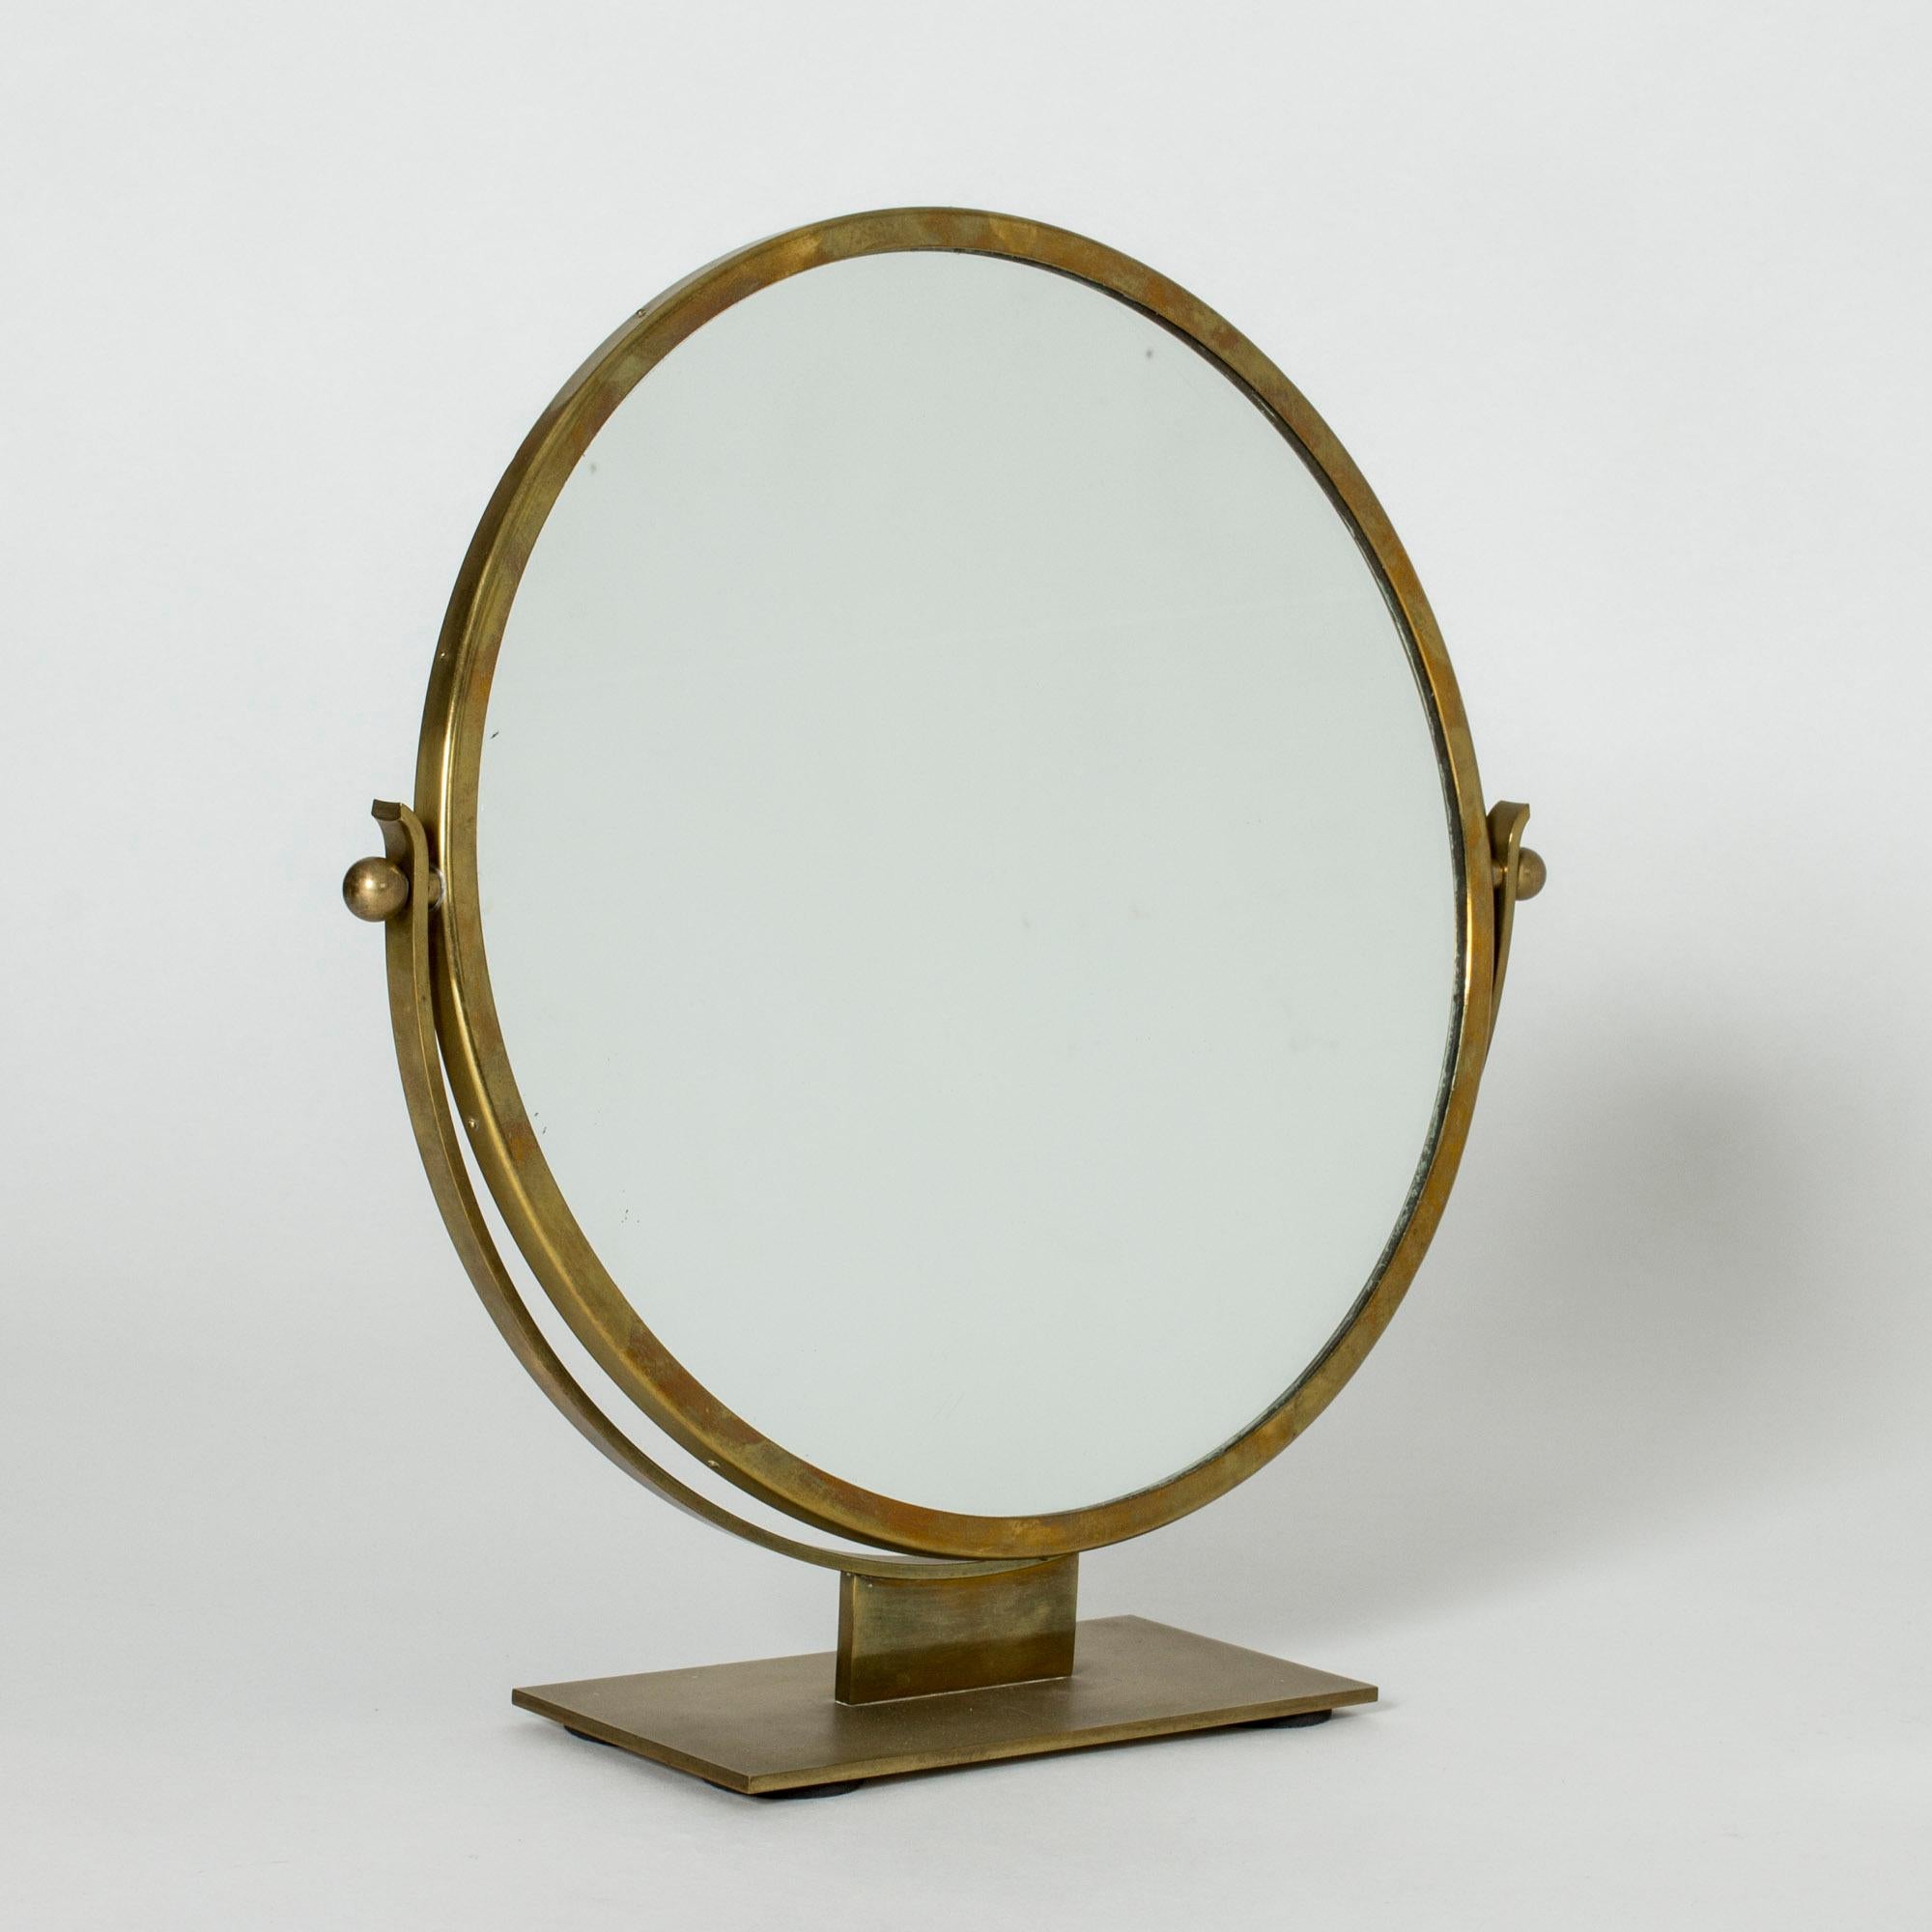 Beautiful functionalist table mirror by Ivar Ålenius-Björk, with strict lines. Made from brass.